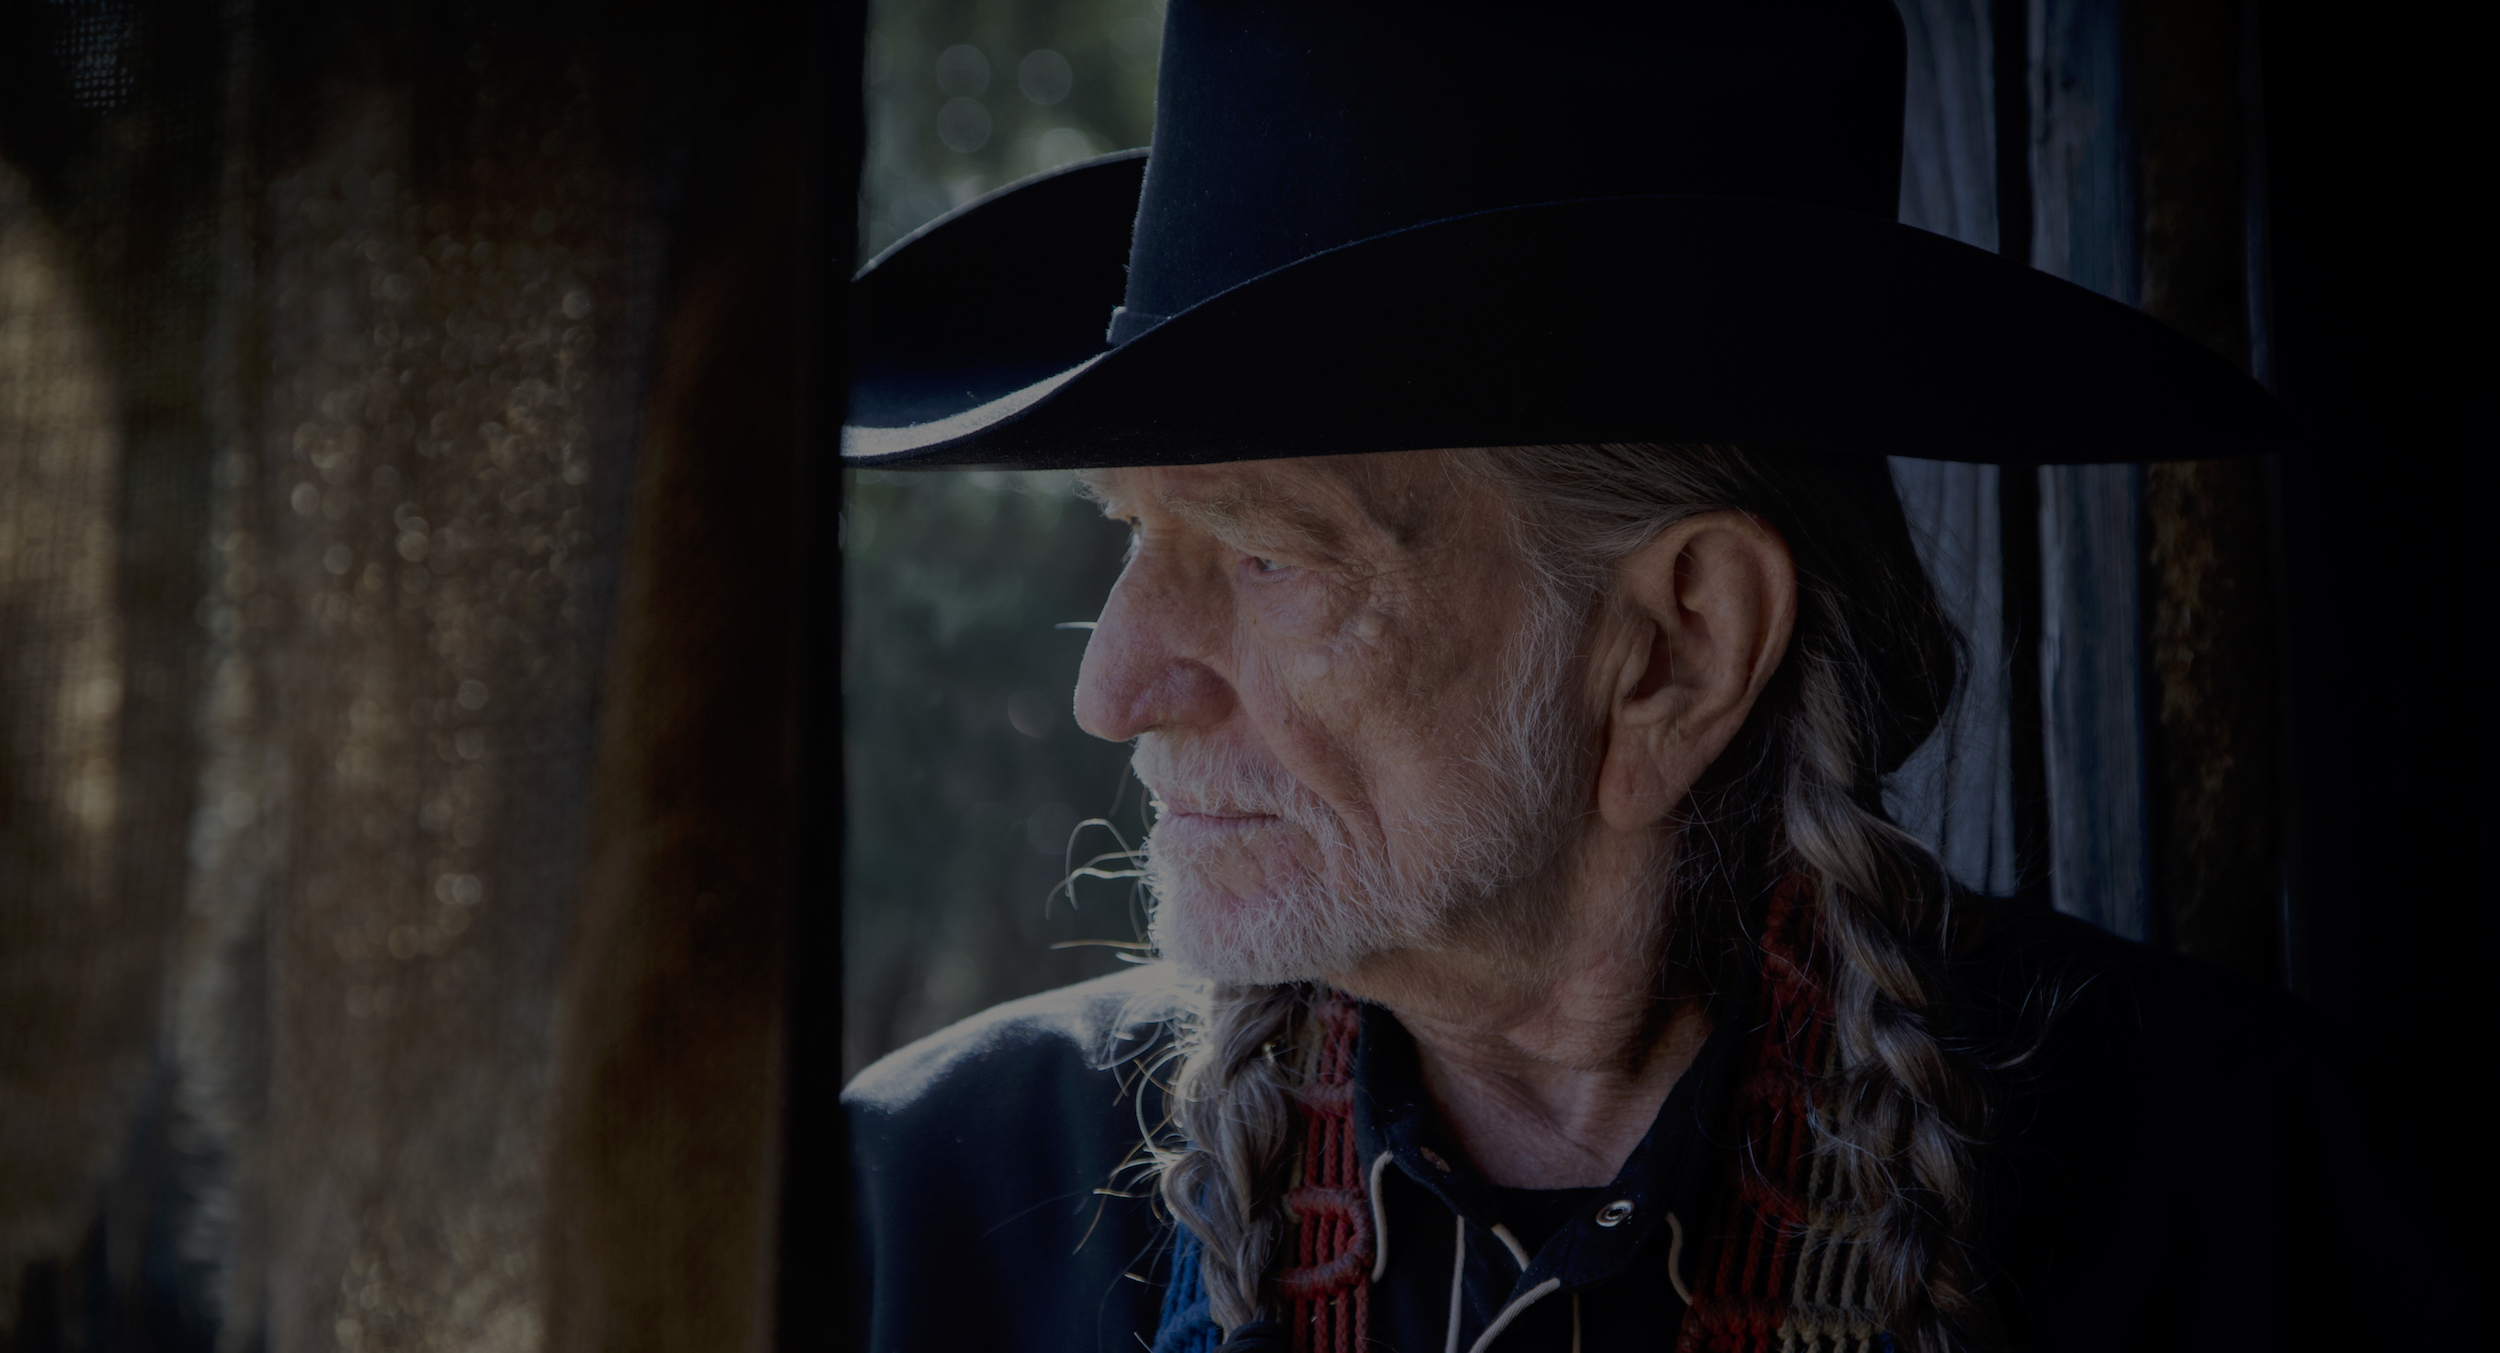 Willie Nelson Headlines 2021 Induction Weekend National Soccer Hall